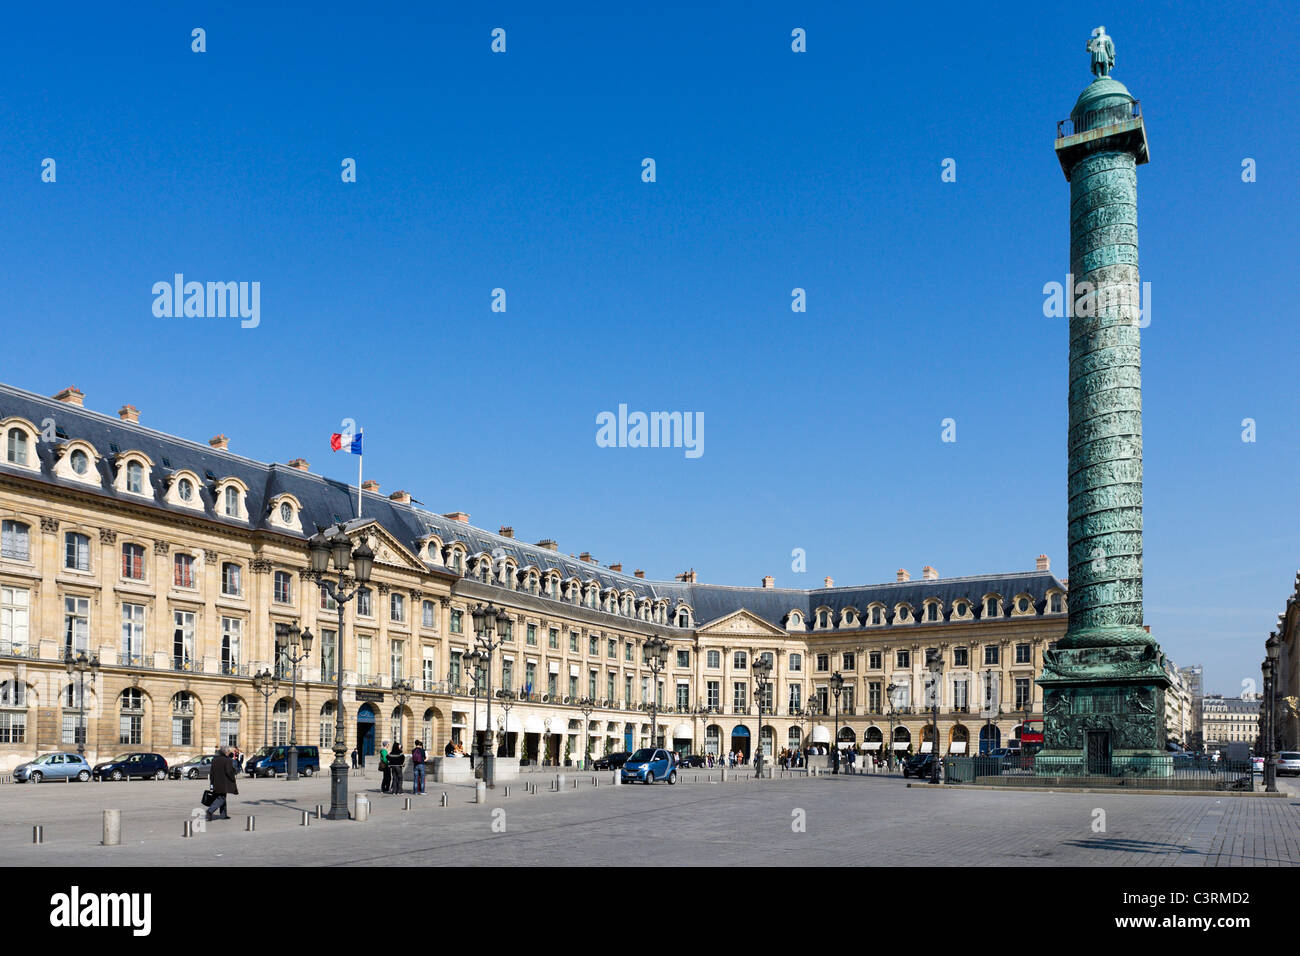 The Ritz Hotel, Palace of Justice and column of Napoleon, Place Vendome, Paris, France Stock Photo